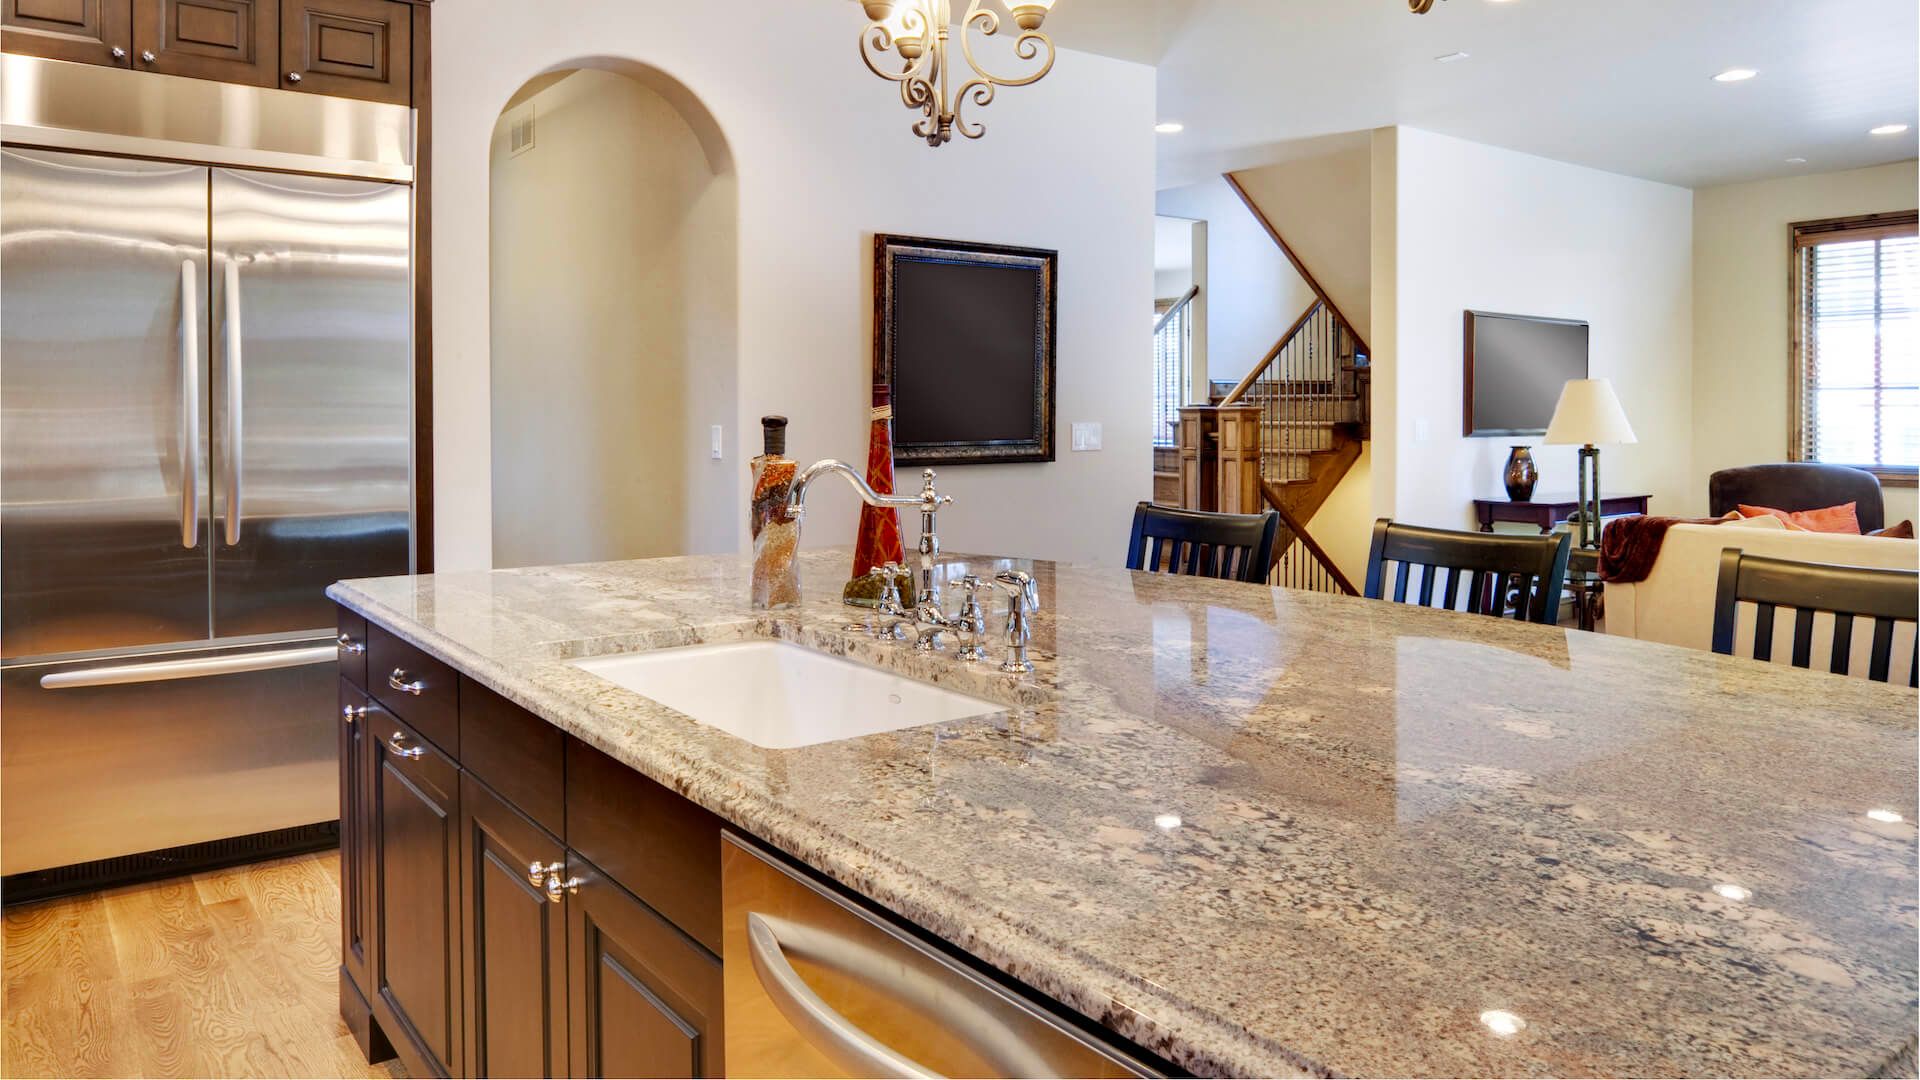 A modern and elegant kitchen showcasing Orlando granite countertops with subtle patterns and colors.